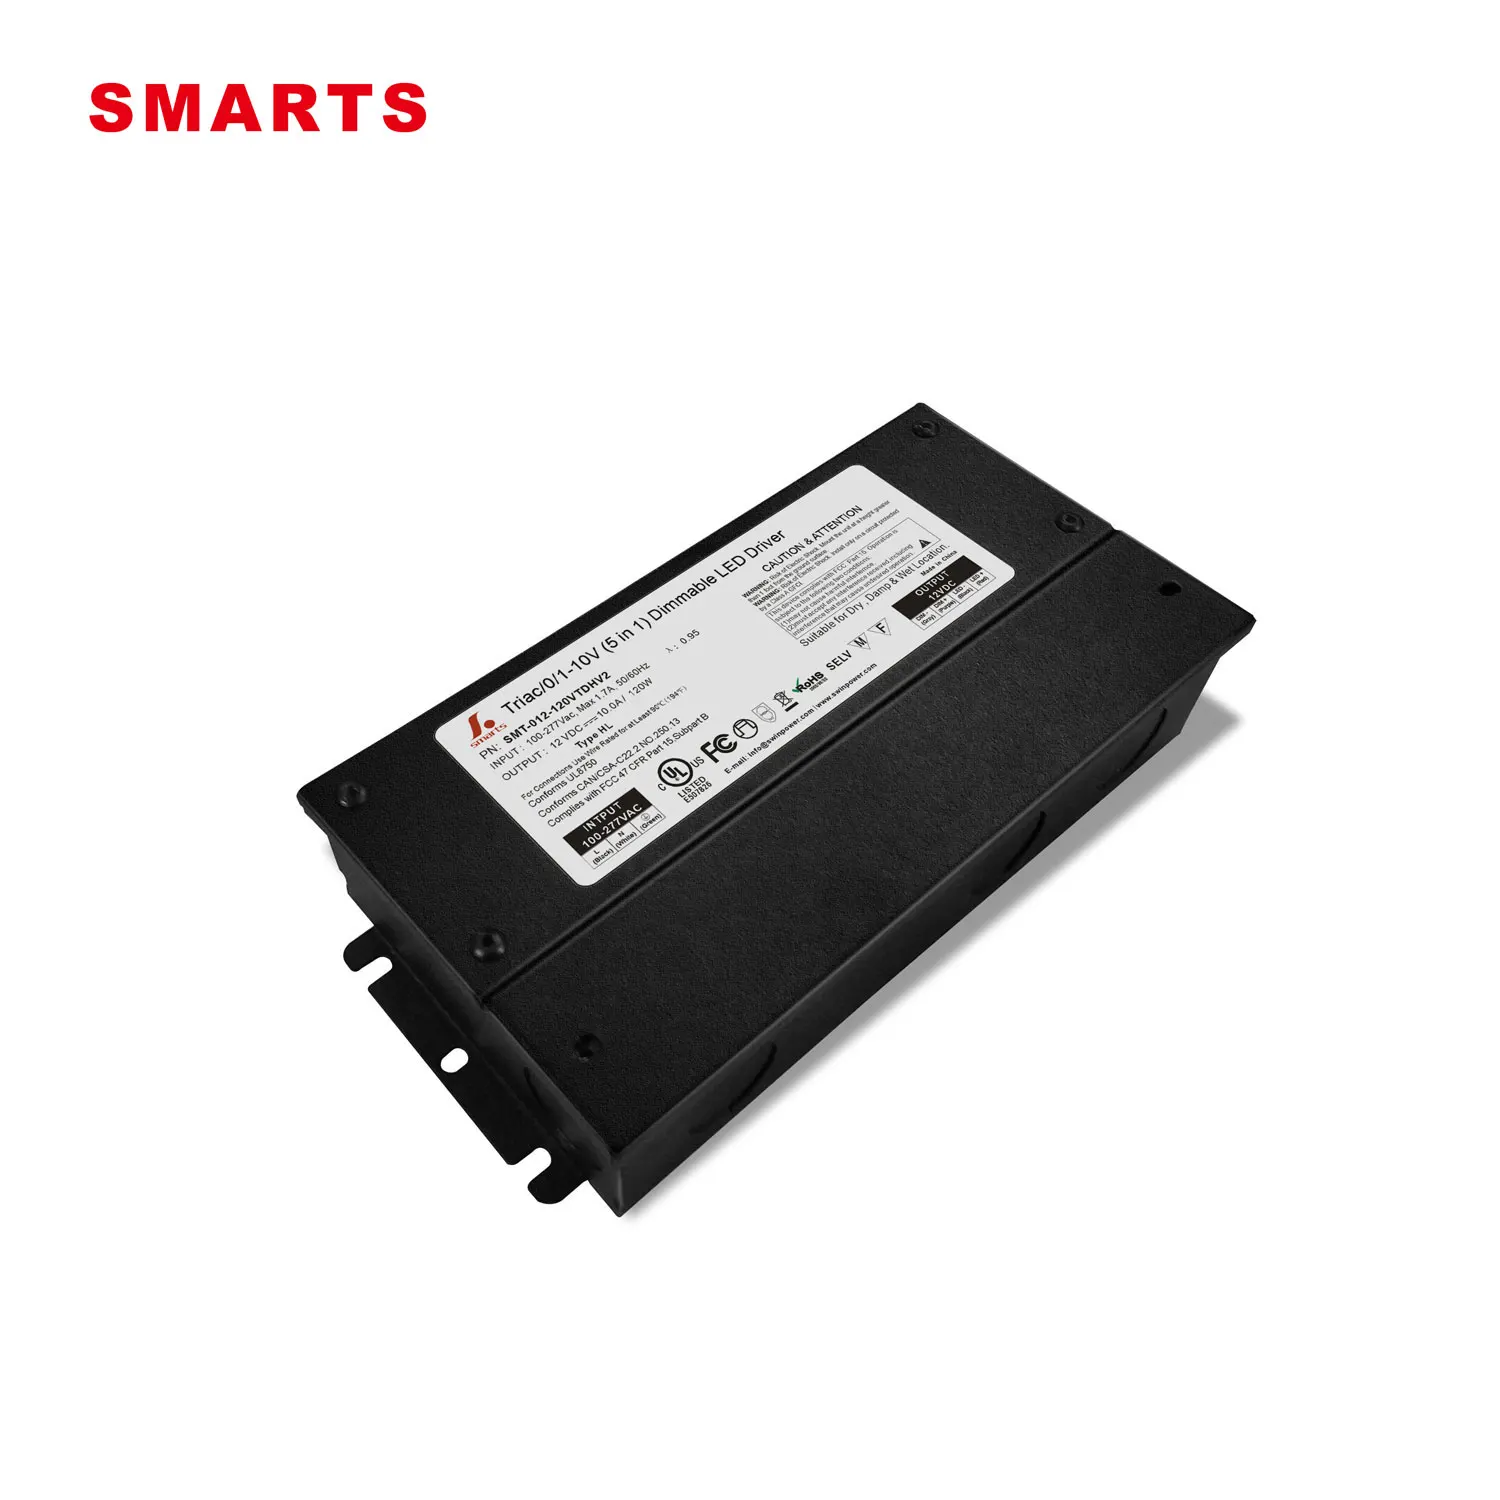 12v 120w constant voltage power supply for Led strip 5 dentro 1 dimmable led driver